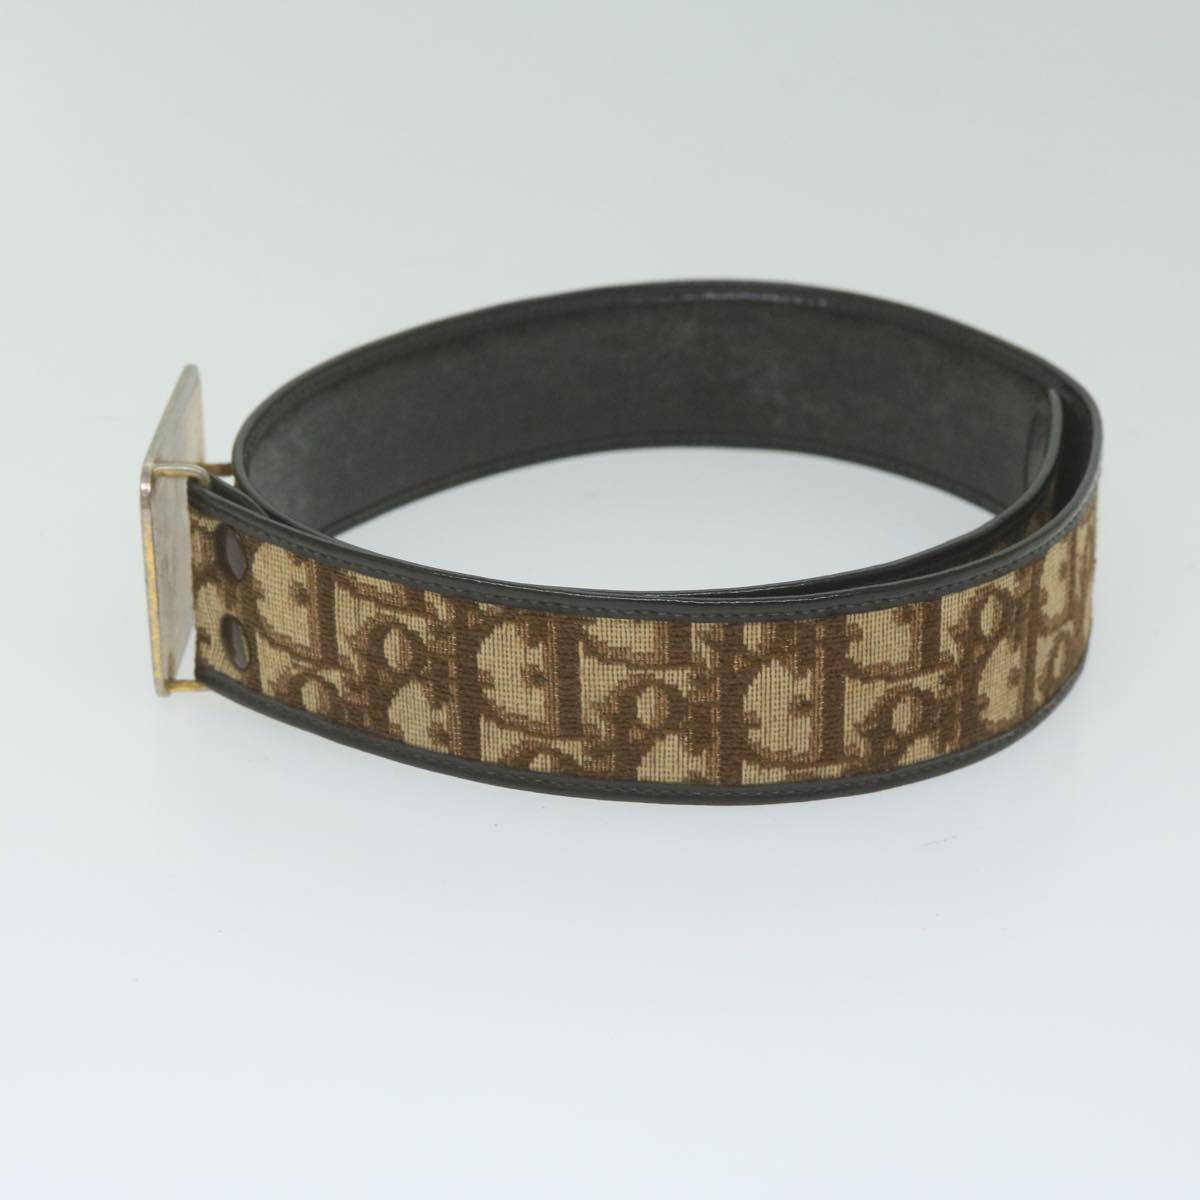 Christian Dior Trotter Canvas Belt 24.8""-28.7"" Brown Auth ti1395